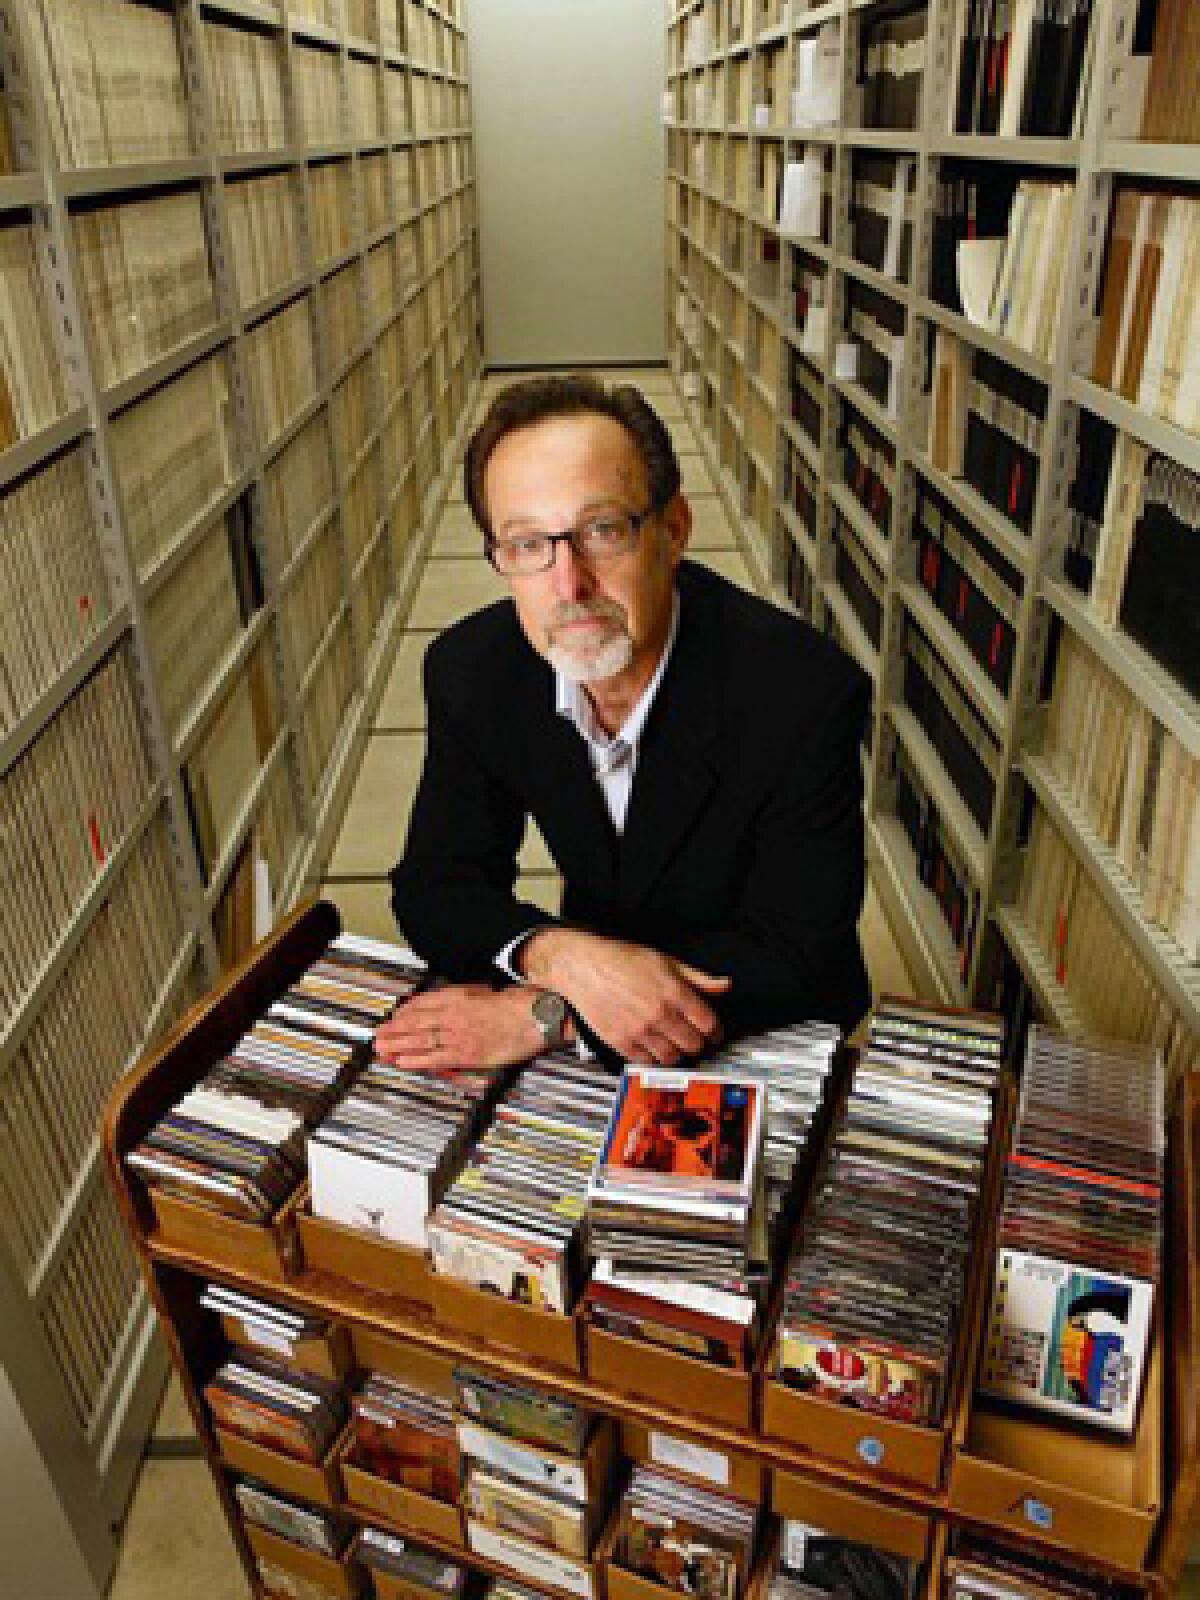 RECORD COLLECTION: Gene DeAnna displays some of the Library of Congress' musical holdings.